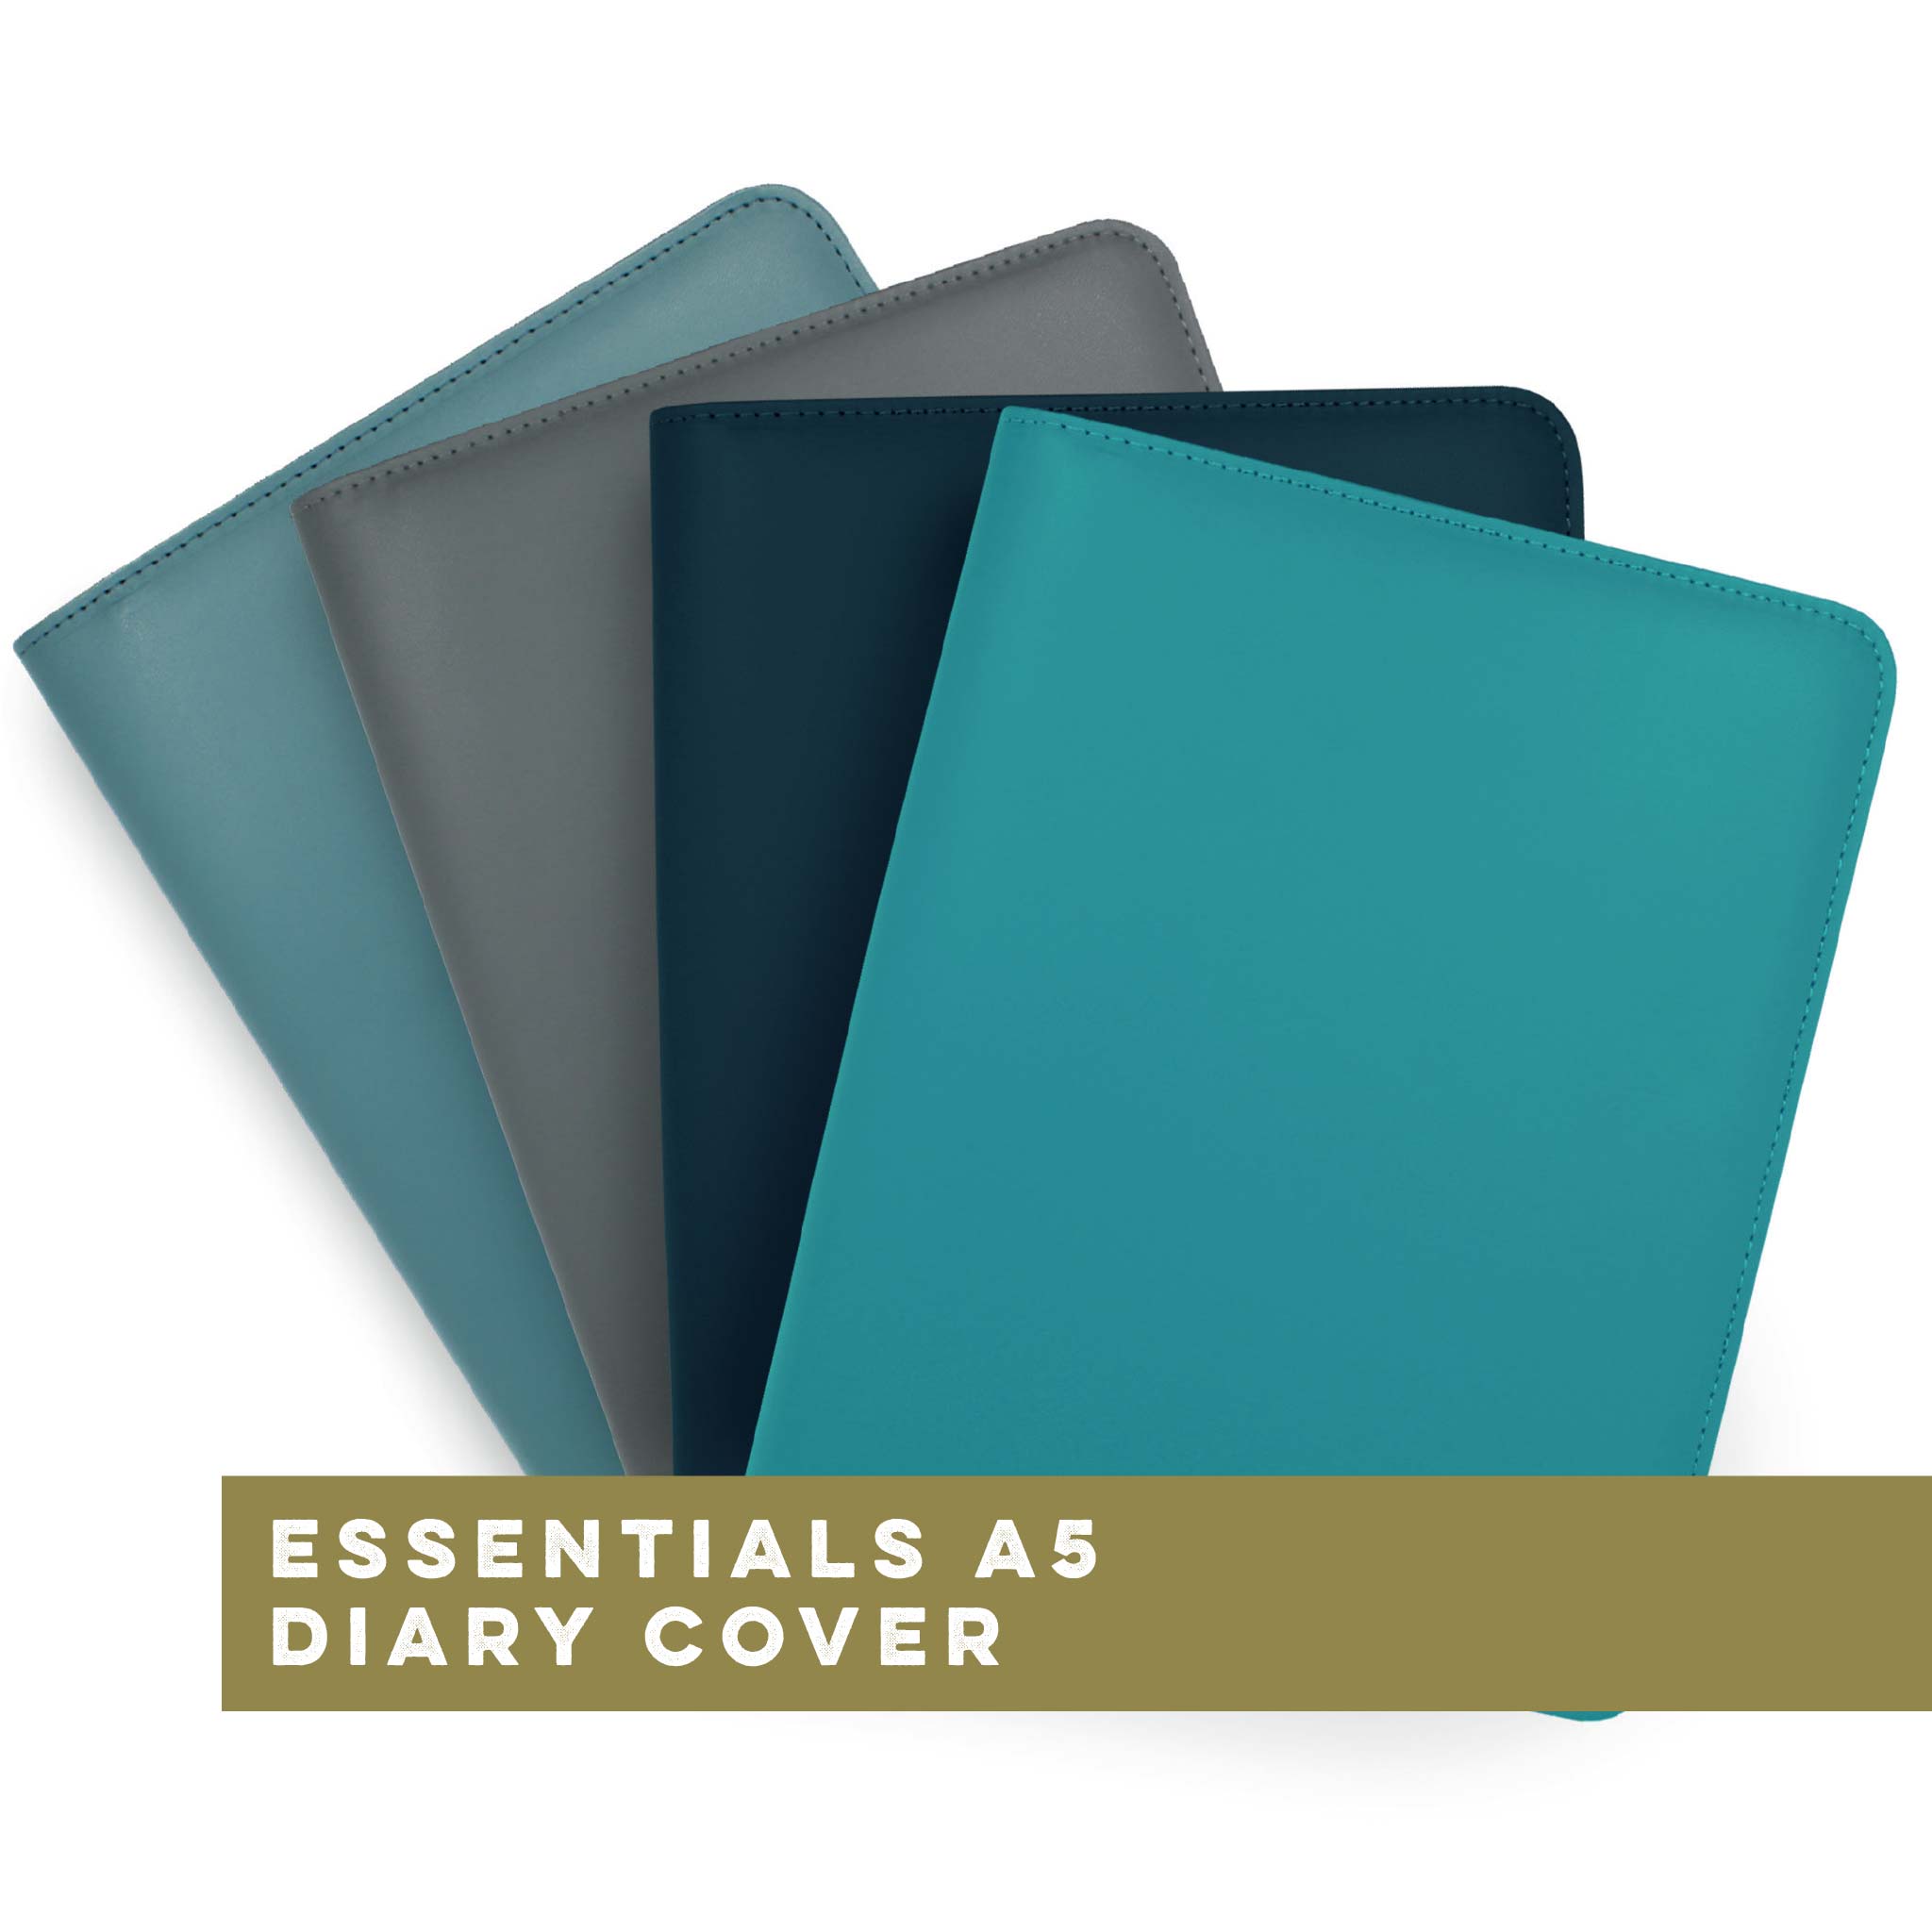 Essentials A5 Diary Cover I A5 Full-Zip Cover with Internal Pocket ...